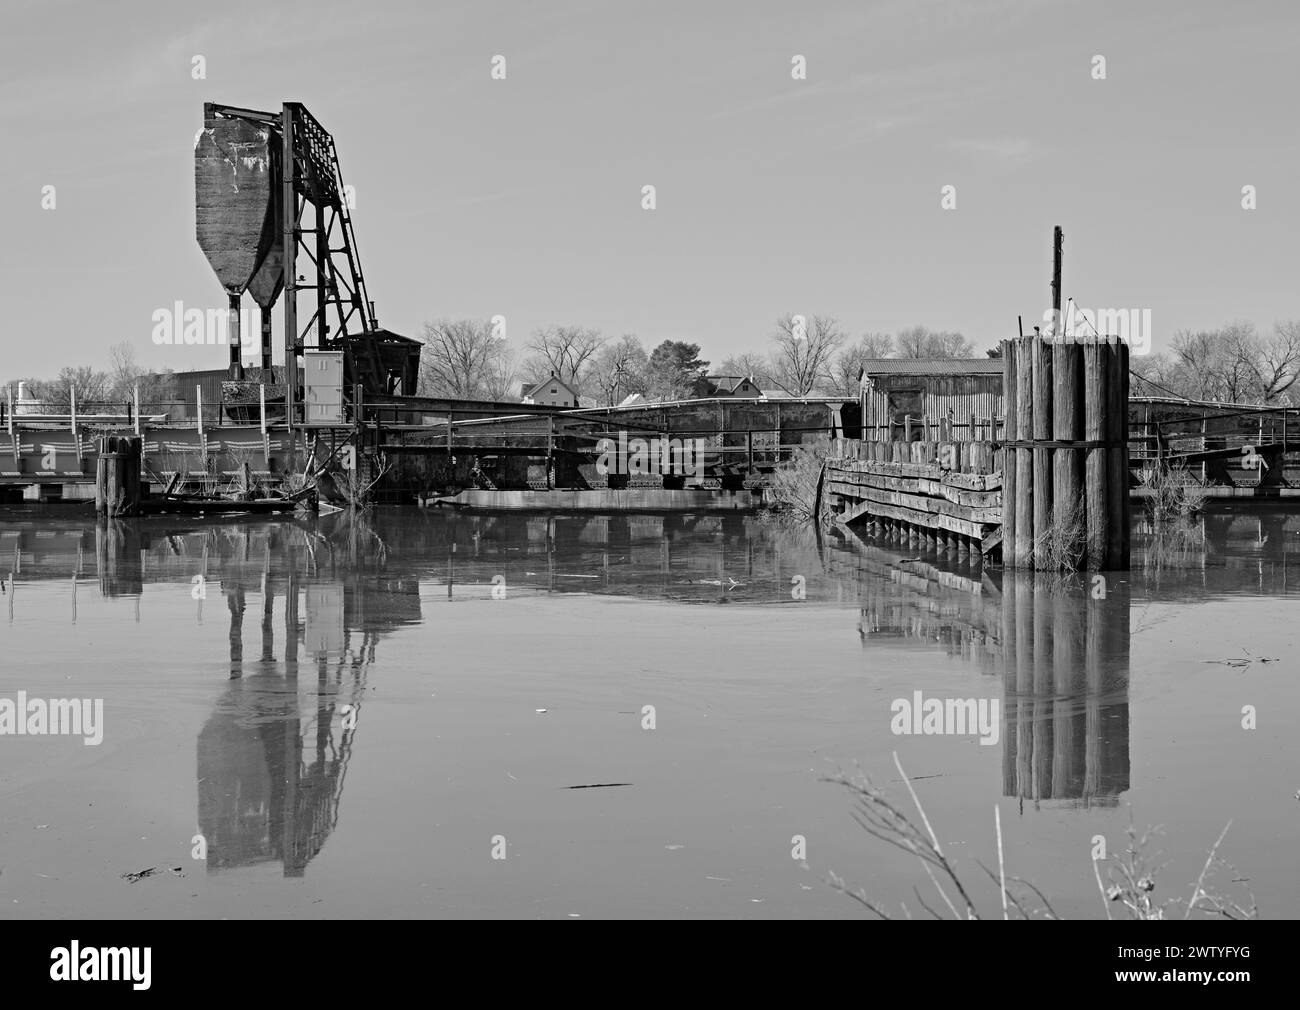 An old bascule railroad bridge,also known as a drawbridge. Over Overpeck Creek in N.J.entrance to the Hackensack River. In Black and White. Stock Photo